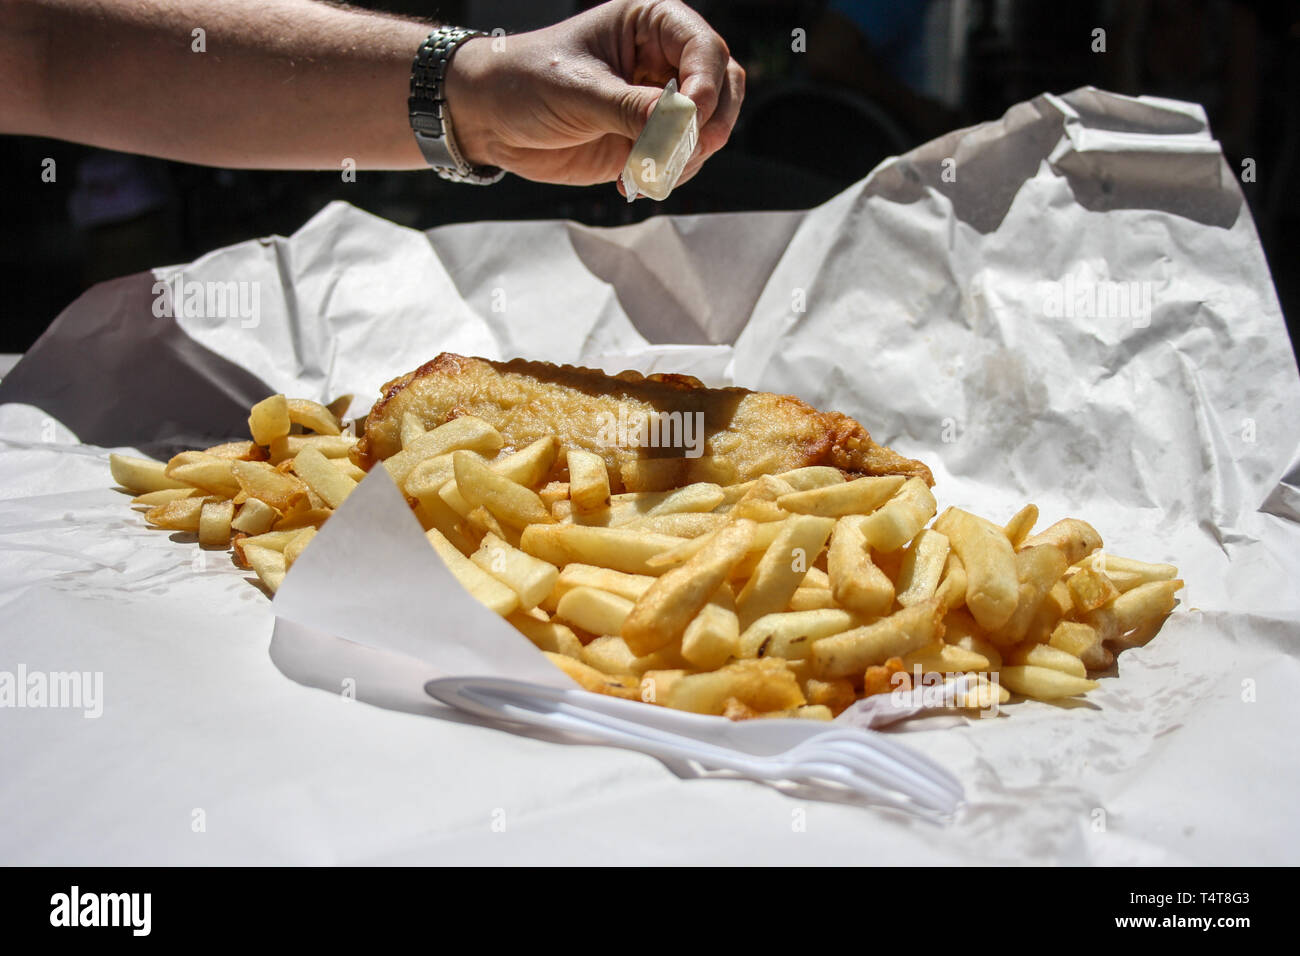 Takeaway fish and chips meal, served on a paper with a plastic fork,  Australia Stock Photo - Alamy